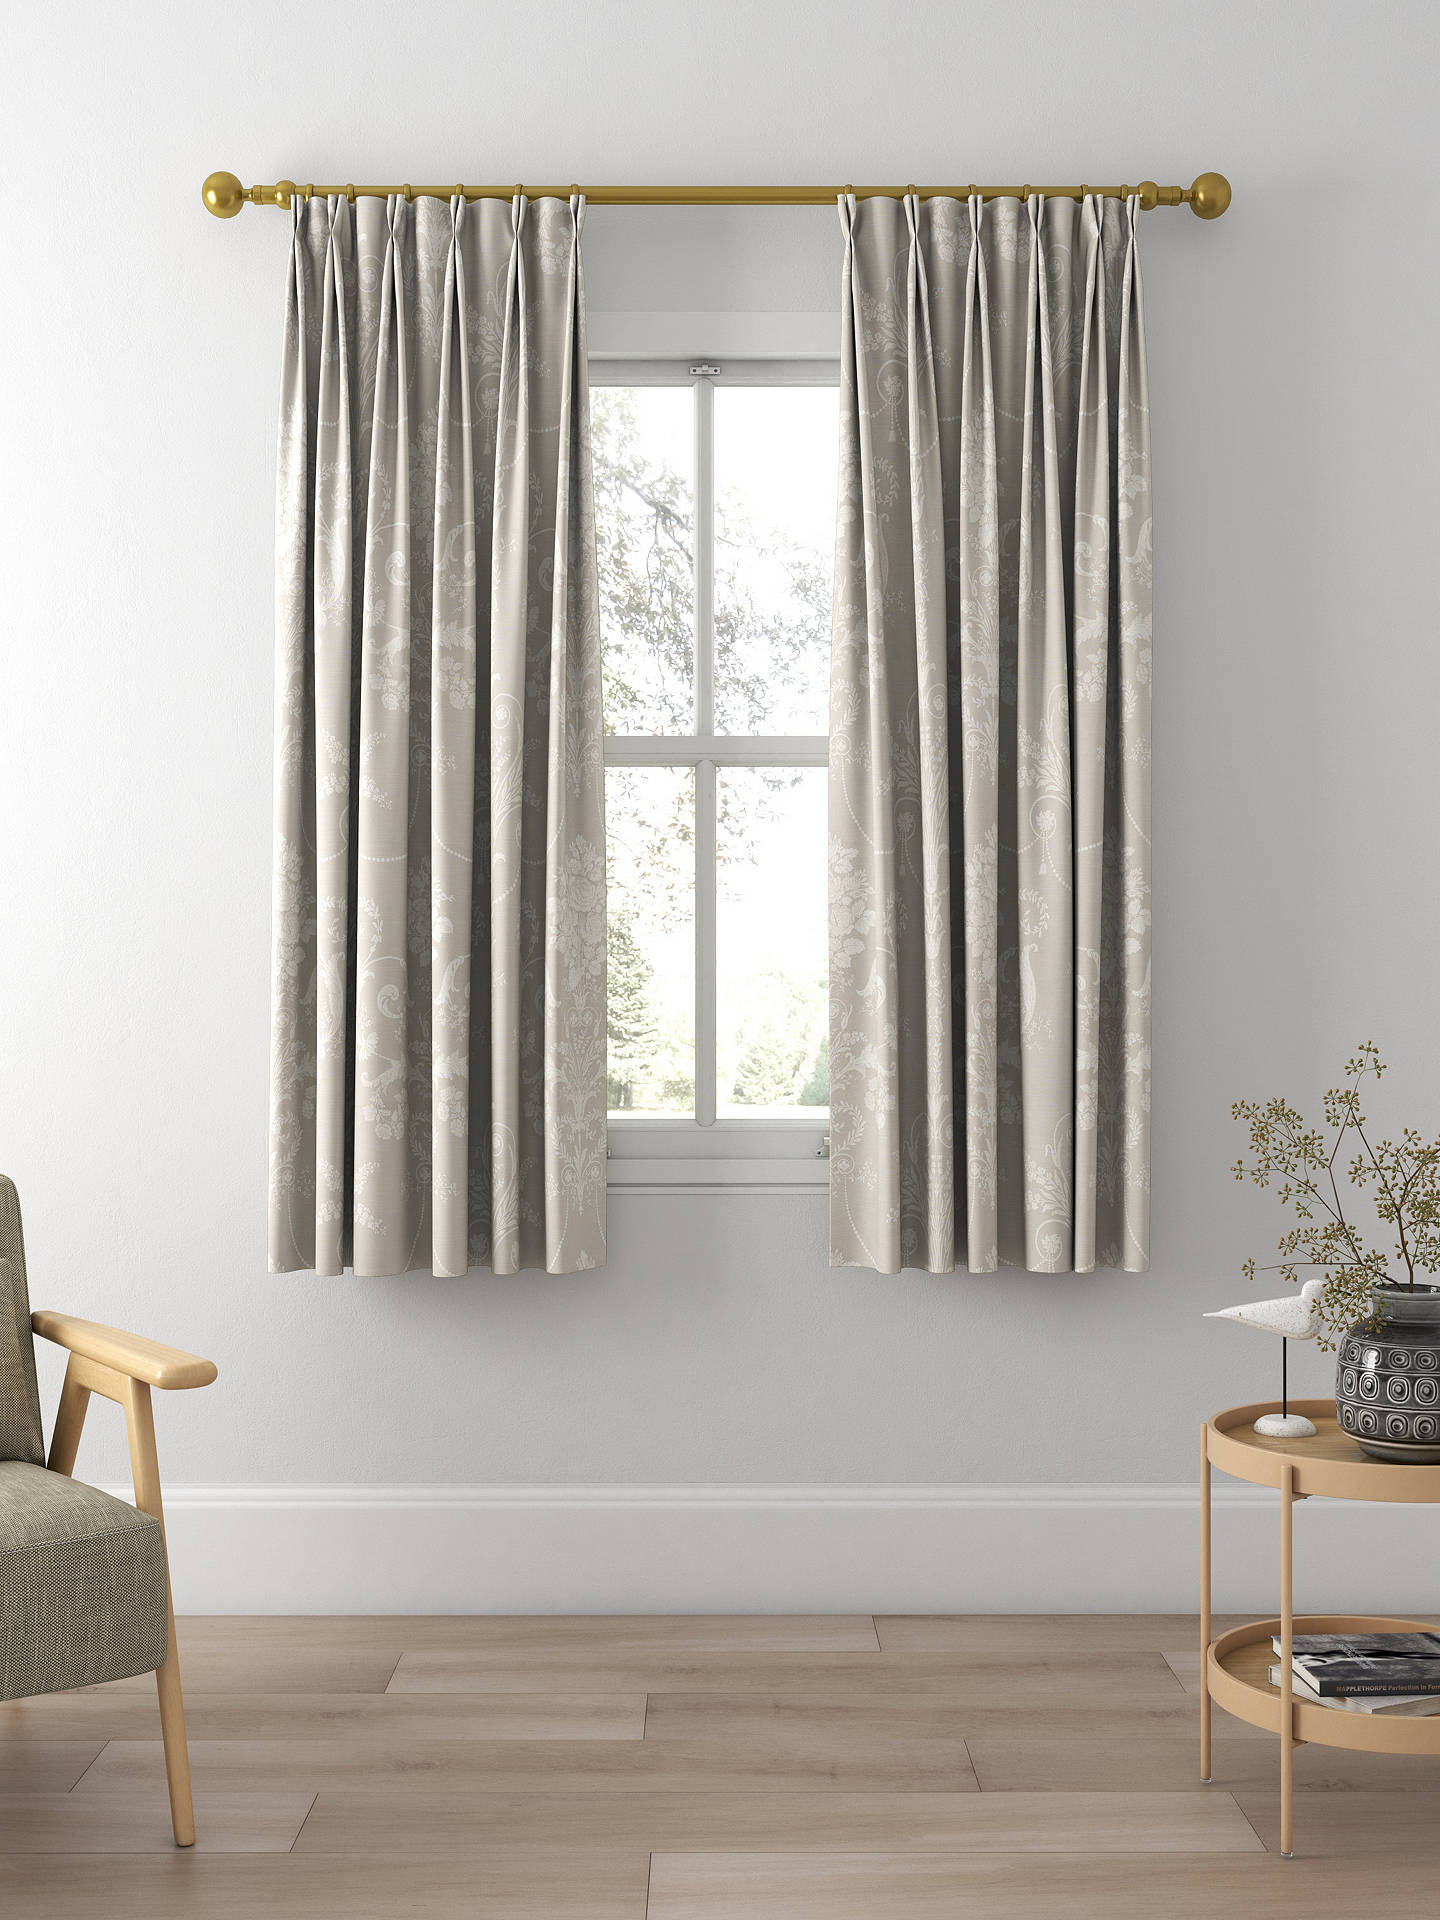 Laura Ashley Josette Made to Measure Curtains, Dove Grey